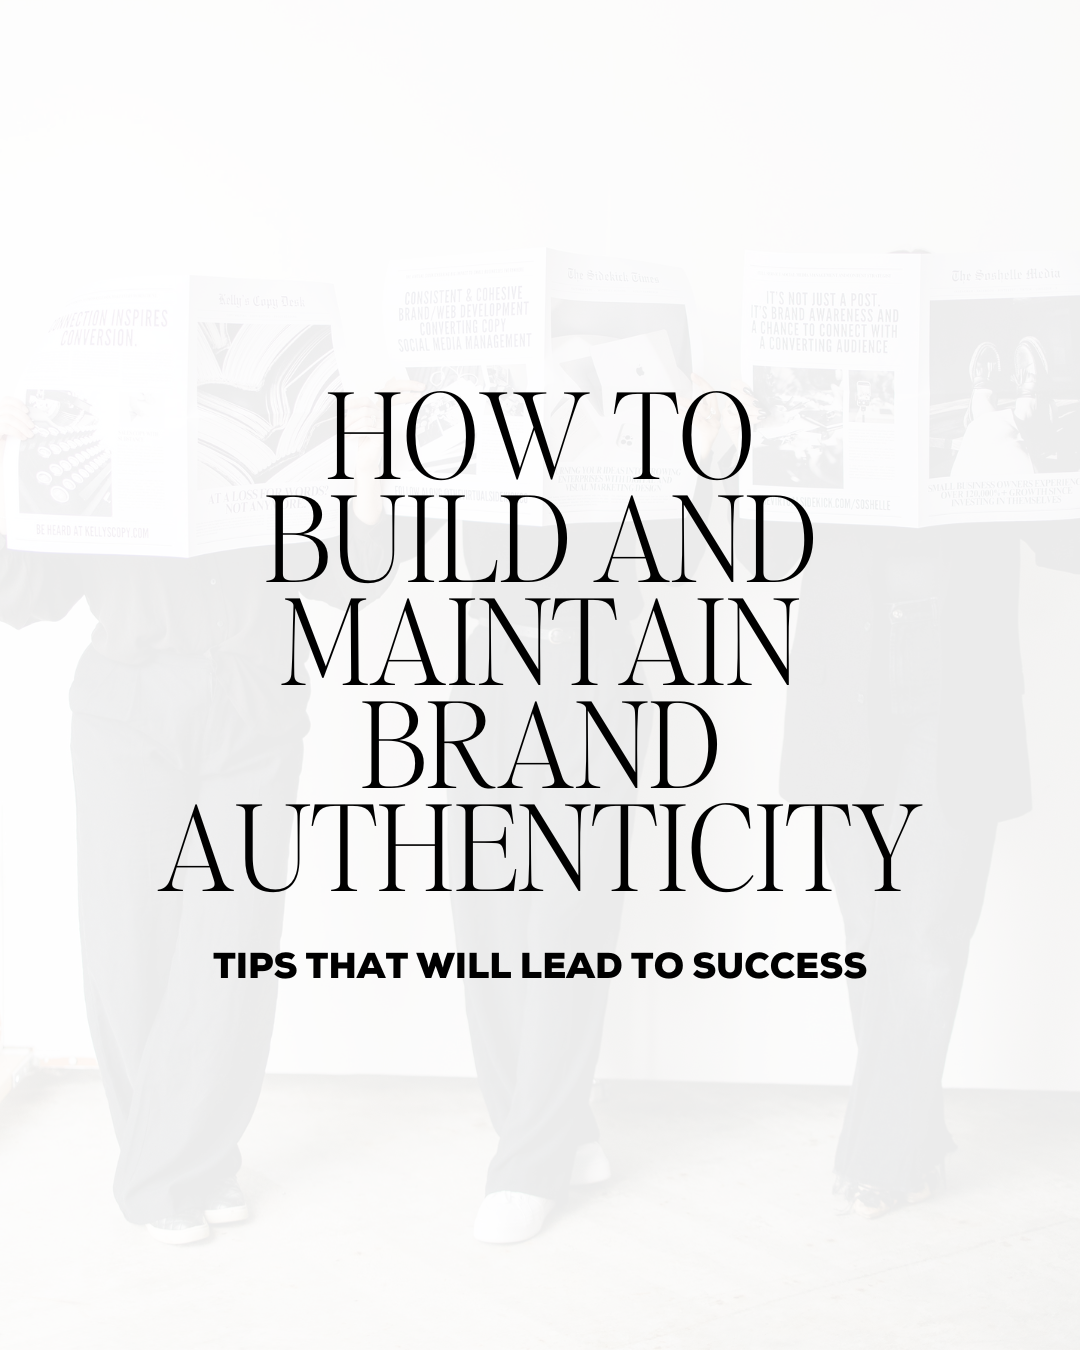 HOW TO BUILD AND MAINTAIN BRAND AUTHENTICITY